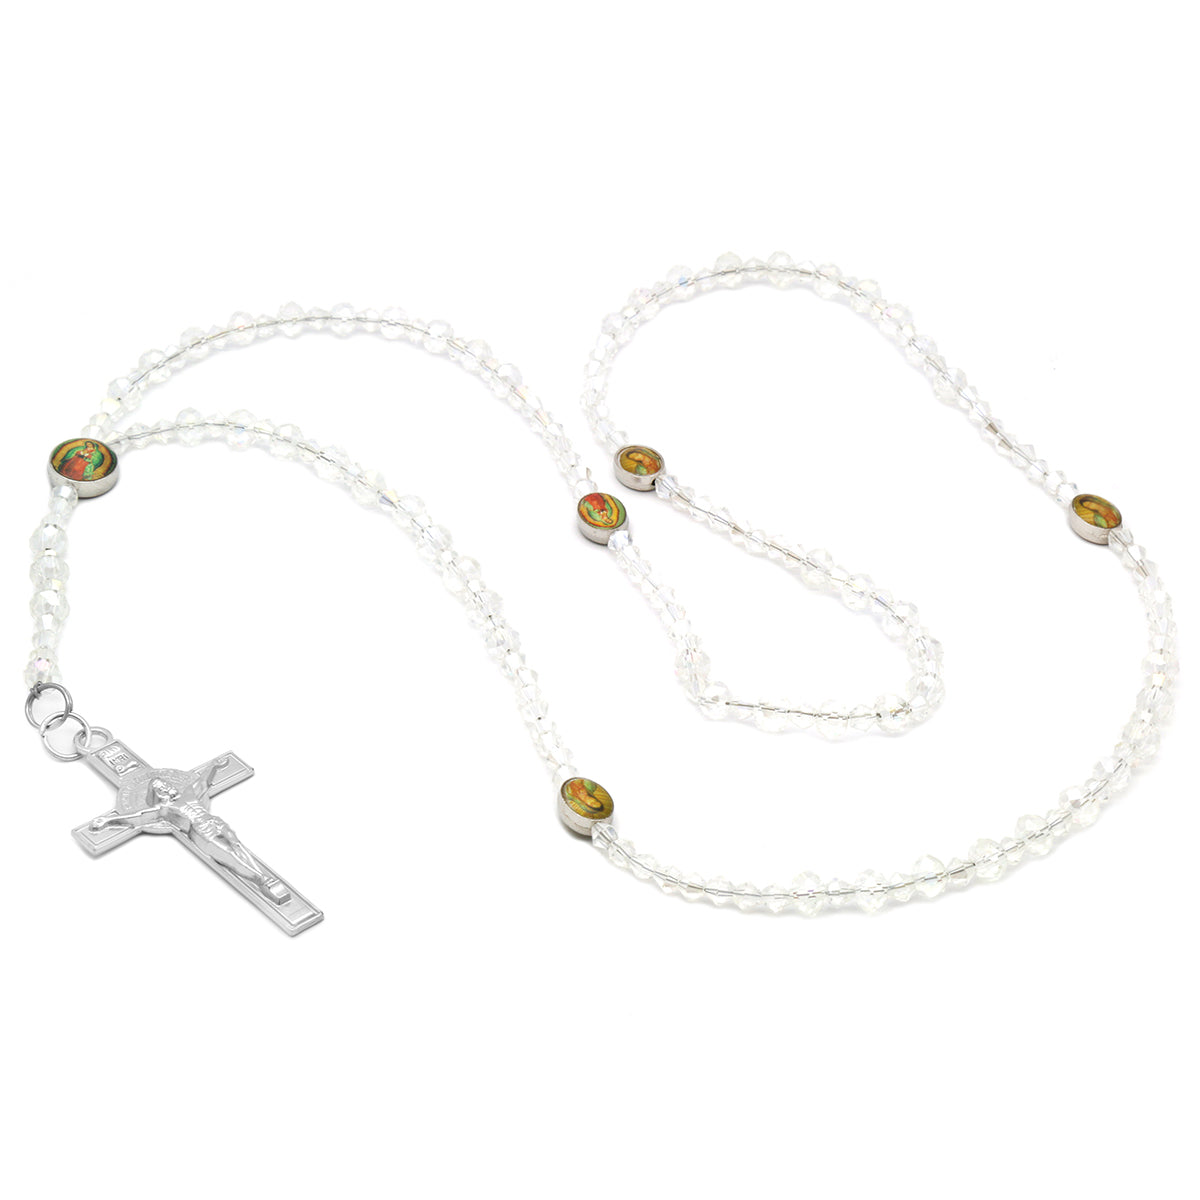 Lupe Epoxy Clear 2 Crystal Rosary With Cross Pendant